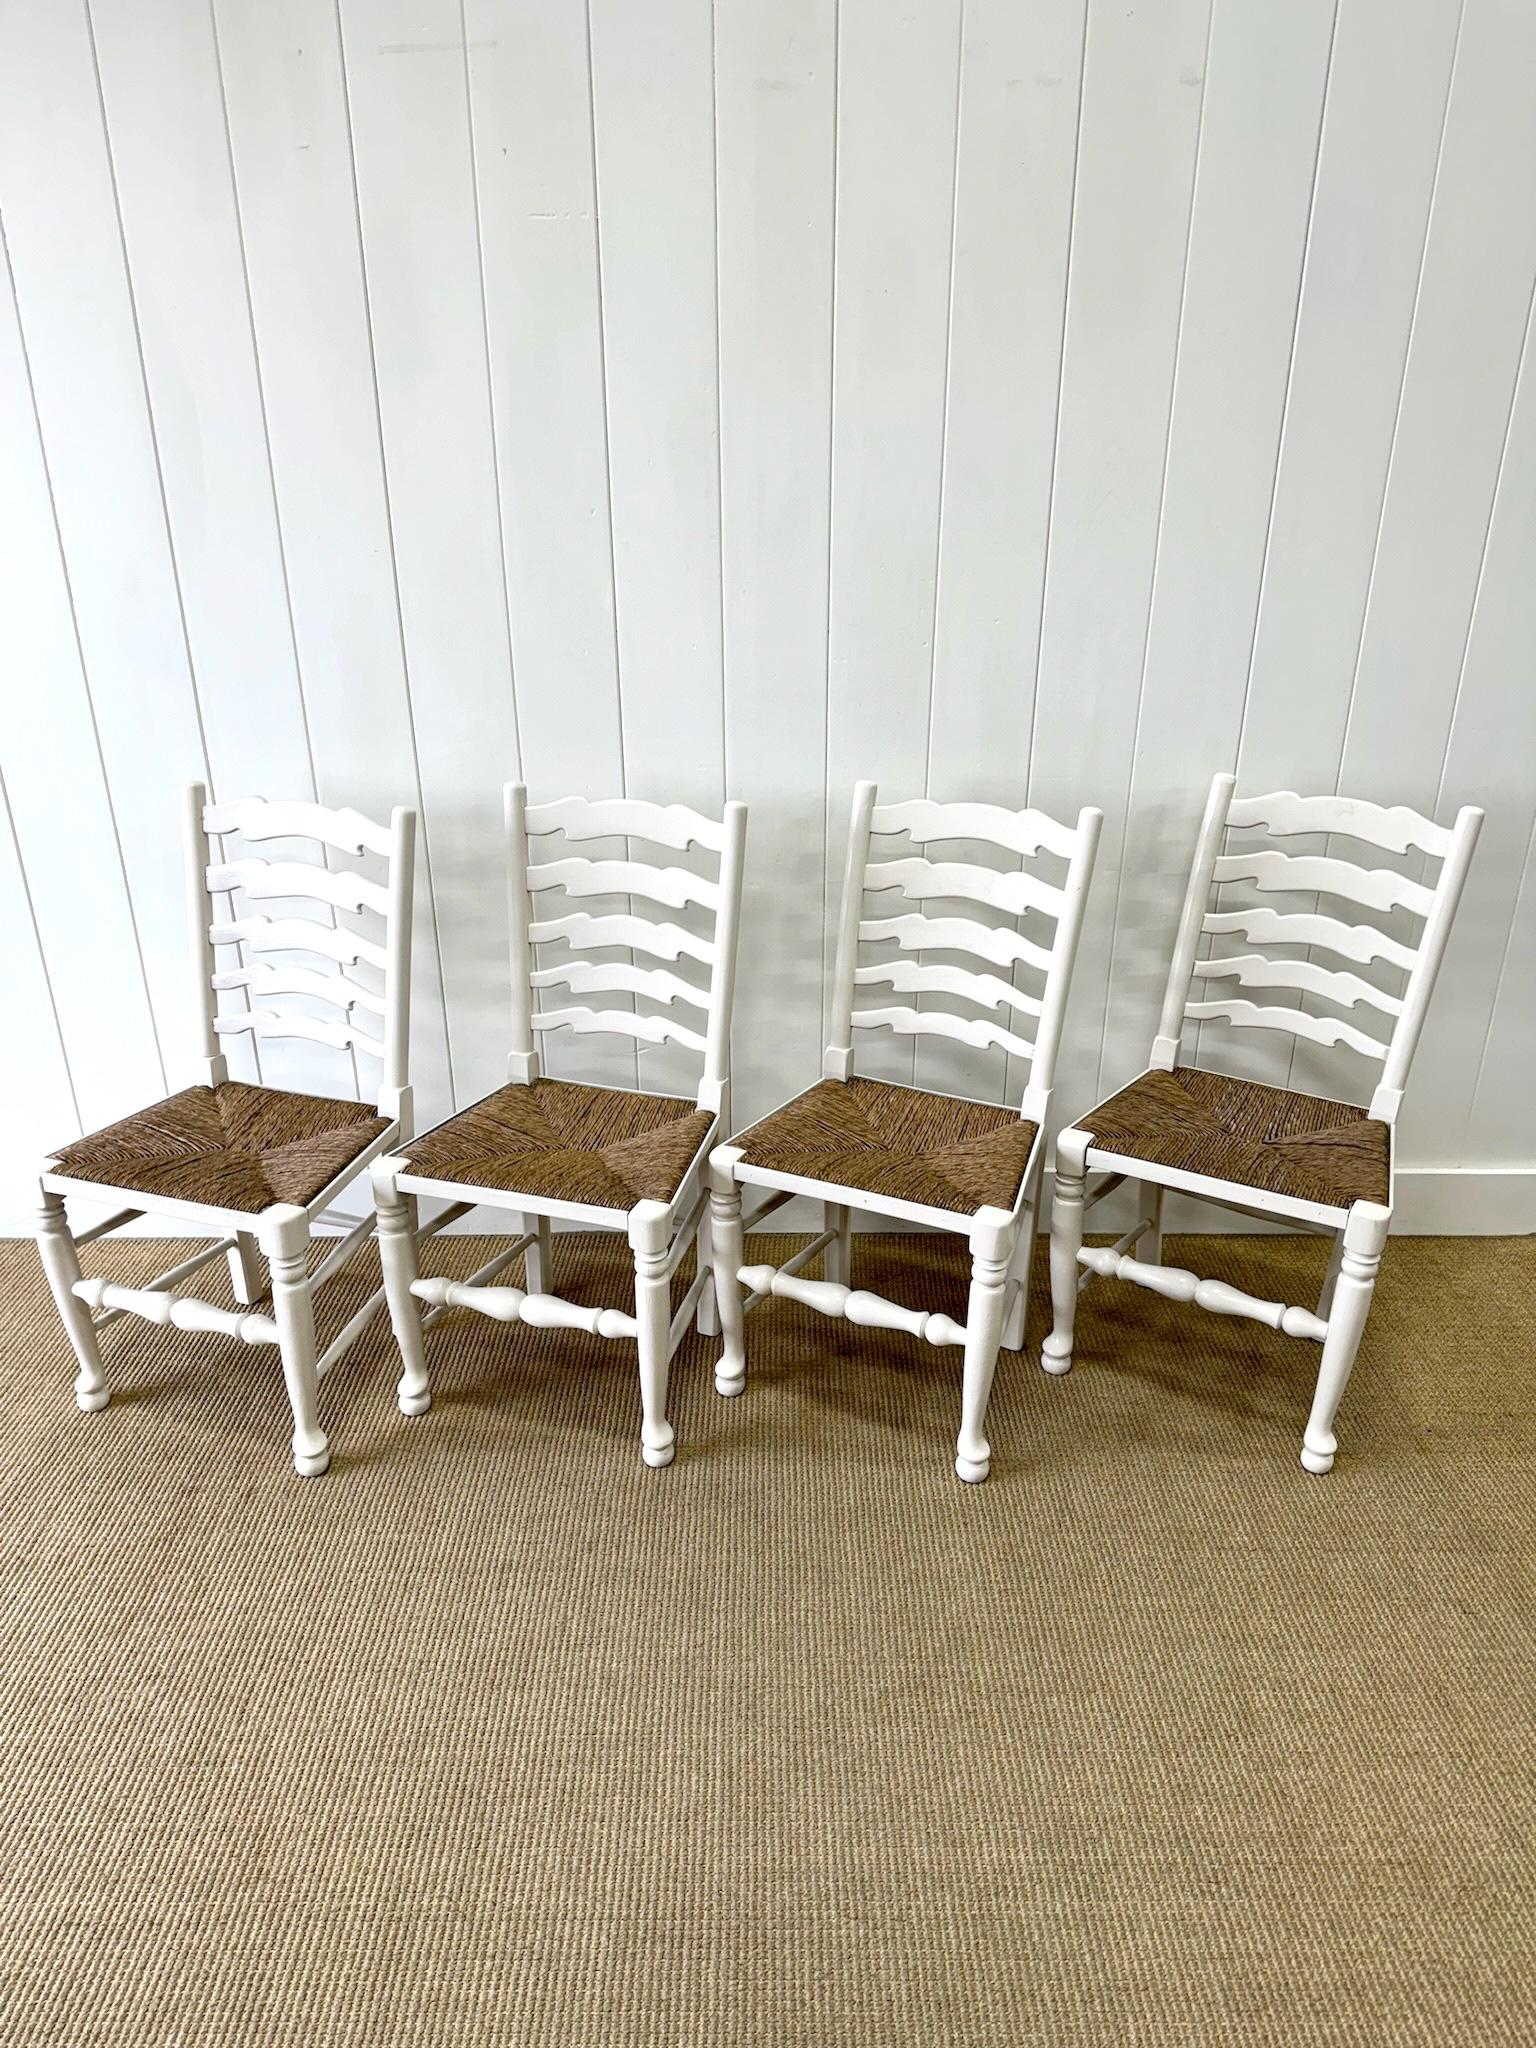 A charming set of 4 English side chairs with solid rush seats.  Lovely fresh Muslin paint. A graceful silhouette sets these chairs apart. Stretchers add support. These are solid chairs, but should not be 